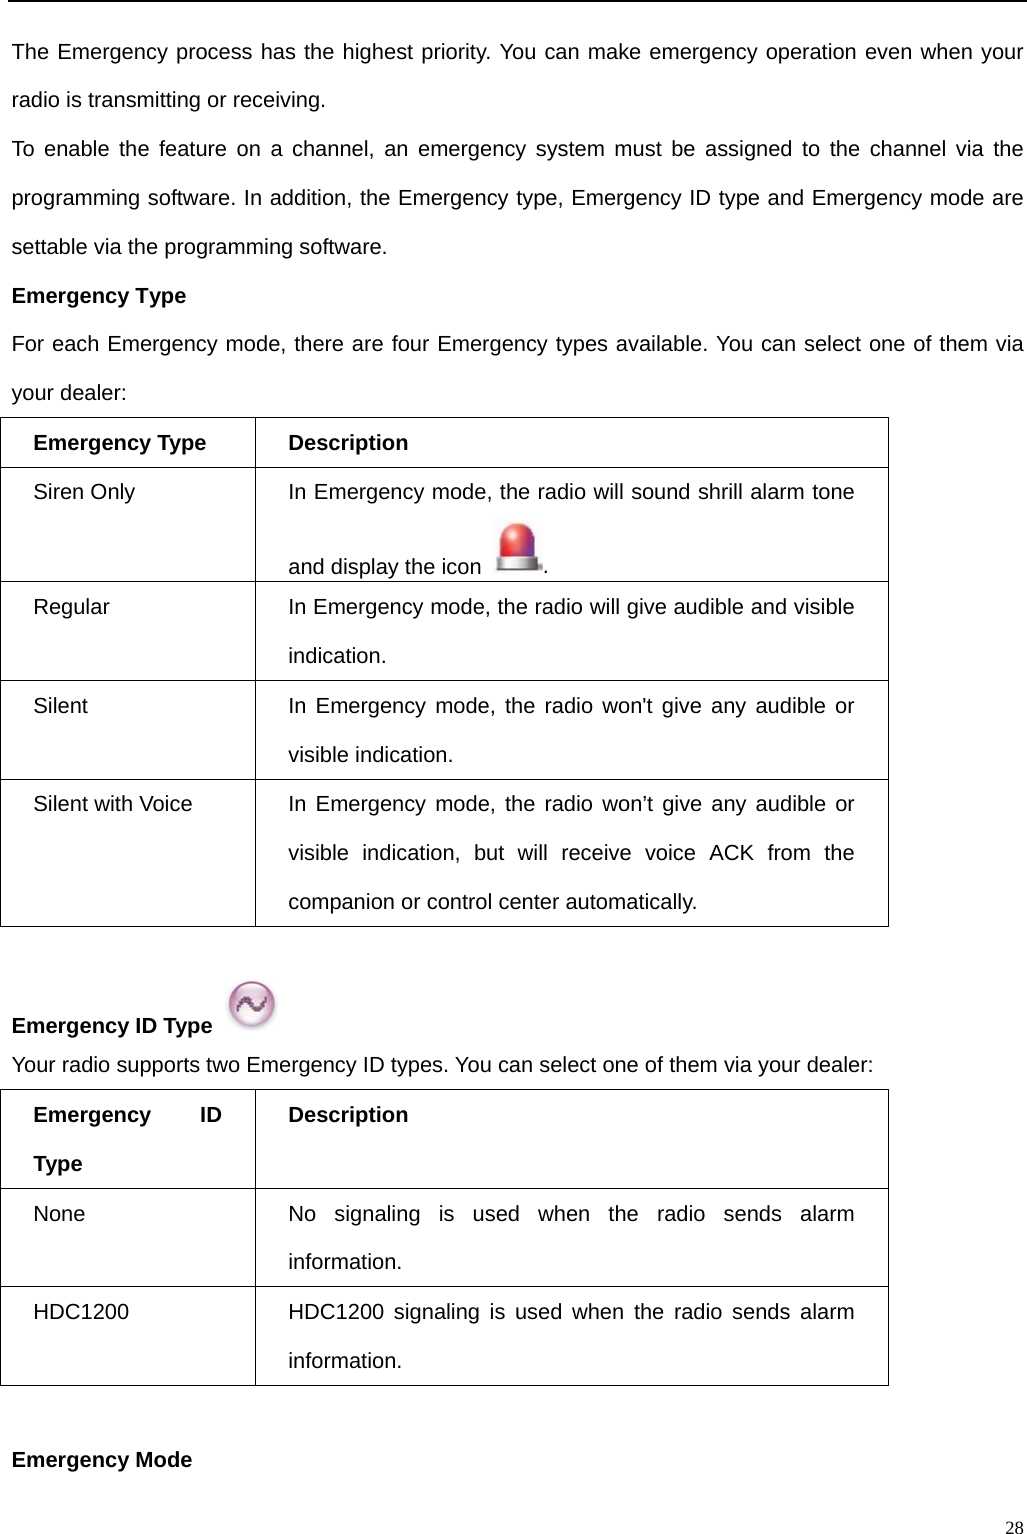                                                                                                            The Emergency process has the highest priority. You can make emergency operation even when your radio is transmitting or receiving.   To enable the feature on a channel, an emergency system must be assigned to the channel via the programming software. In addition, the Emergency type, Emergency ID type and Emergency mode are settable via the programming software.   Emergency Type For each Emergency mode, there are four Emergency types available. You can select one of them via your dealer:   Emergency Type Description Siren Only In Emergency mode, the radio will sound shrill alarm tone and display the icon  .   Regular In Emergency mode, the radio will give audible and visible indication.   Silent In Emergency mode, the radio won&apos;t give any audible or visible indication.   Silent with Voice In Emergency mode, the radio won’t give any audible or visible indication, but will receive voice ACK from the companion or control center automatically.    Emergency ID Type   Your radio supports two Emergency ID types. You can select one of them via your dealer:   Emergency ID Type Description None No signaling is used when the radio sends alarm information. HDC1200 HDC1200 signaling is used when the radio sends alarm information.  Emergency Mode   28